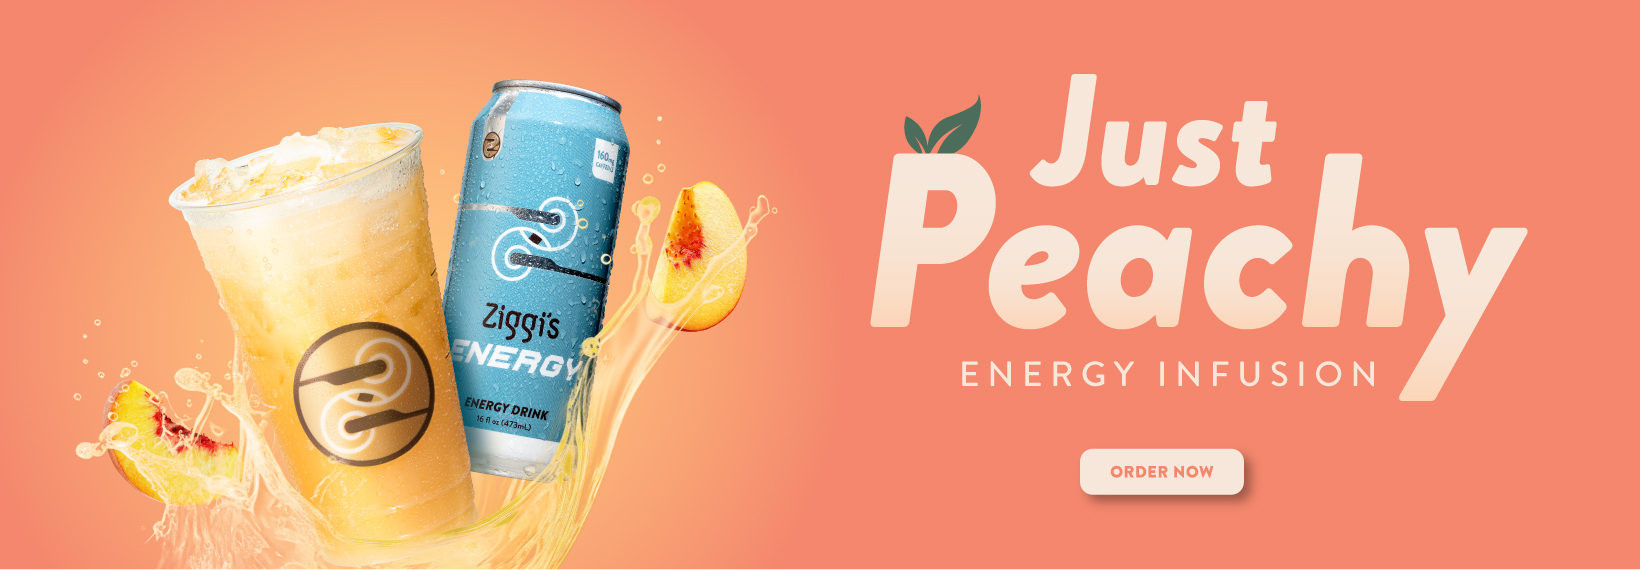 image of the Just peachy energy infusion